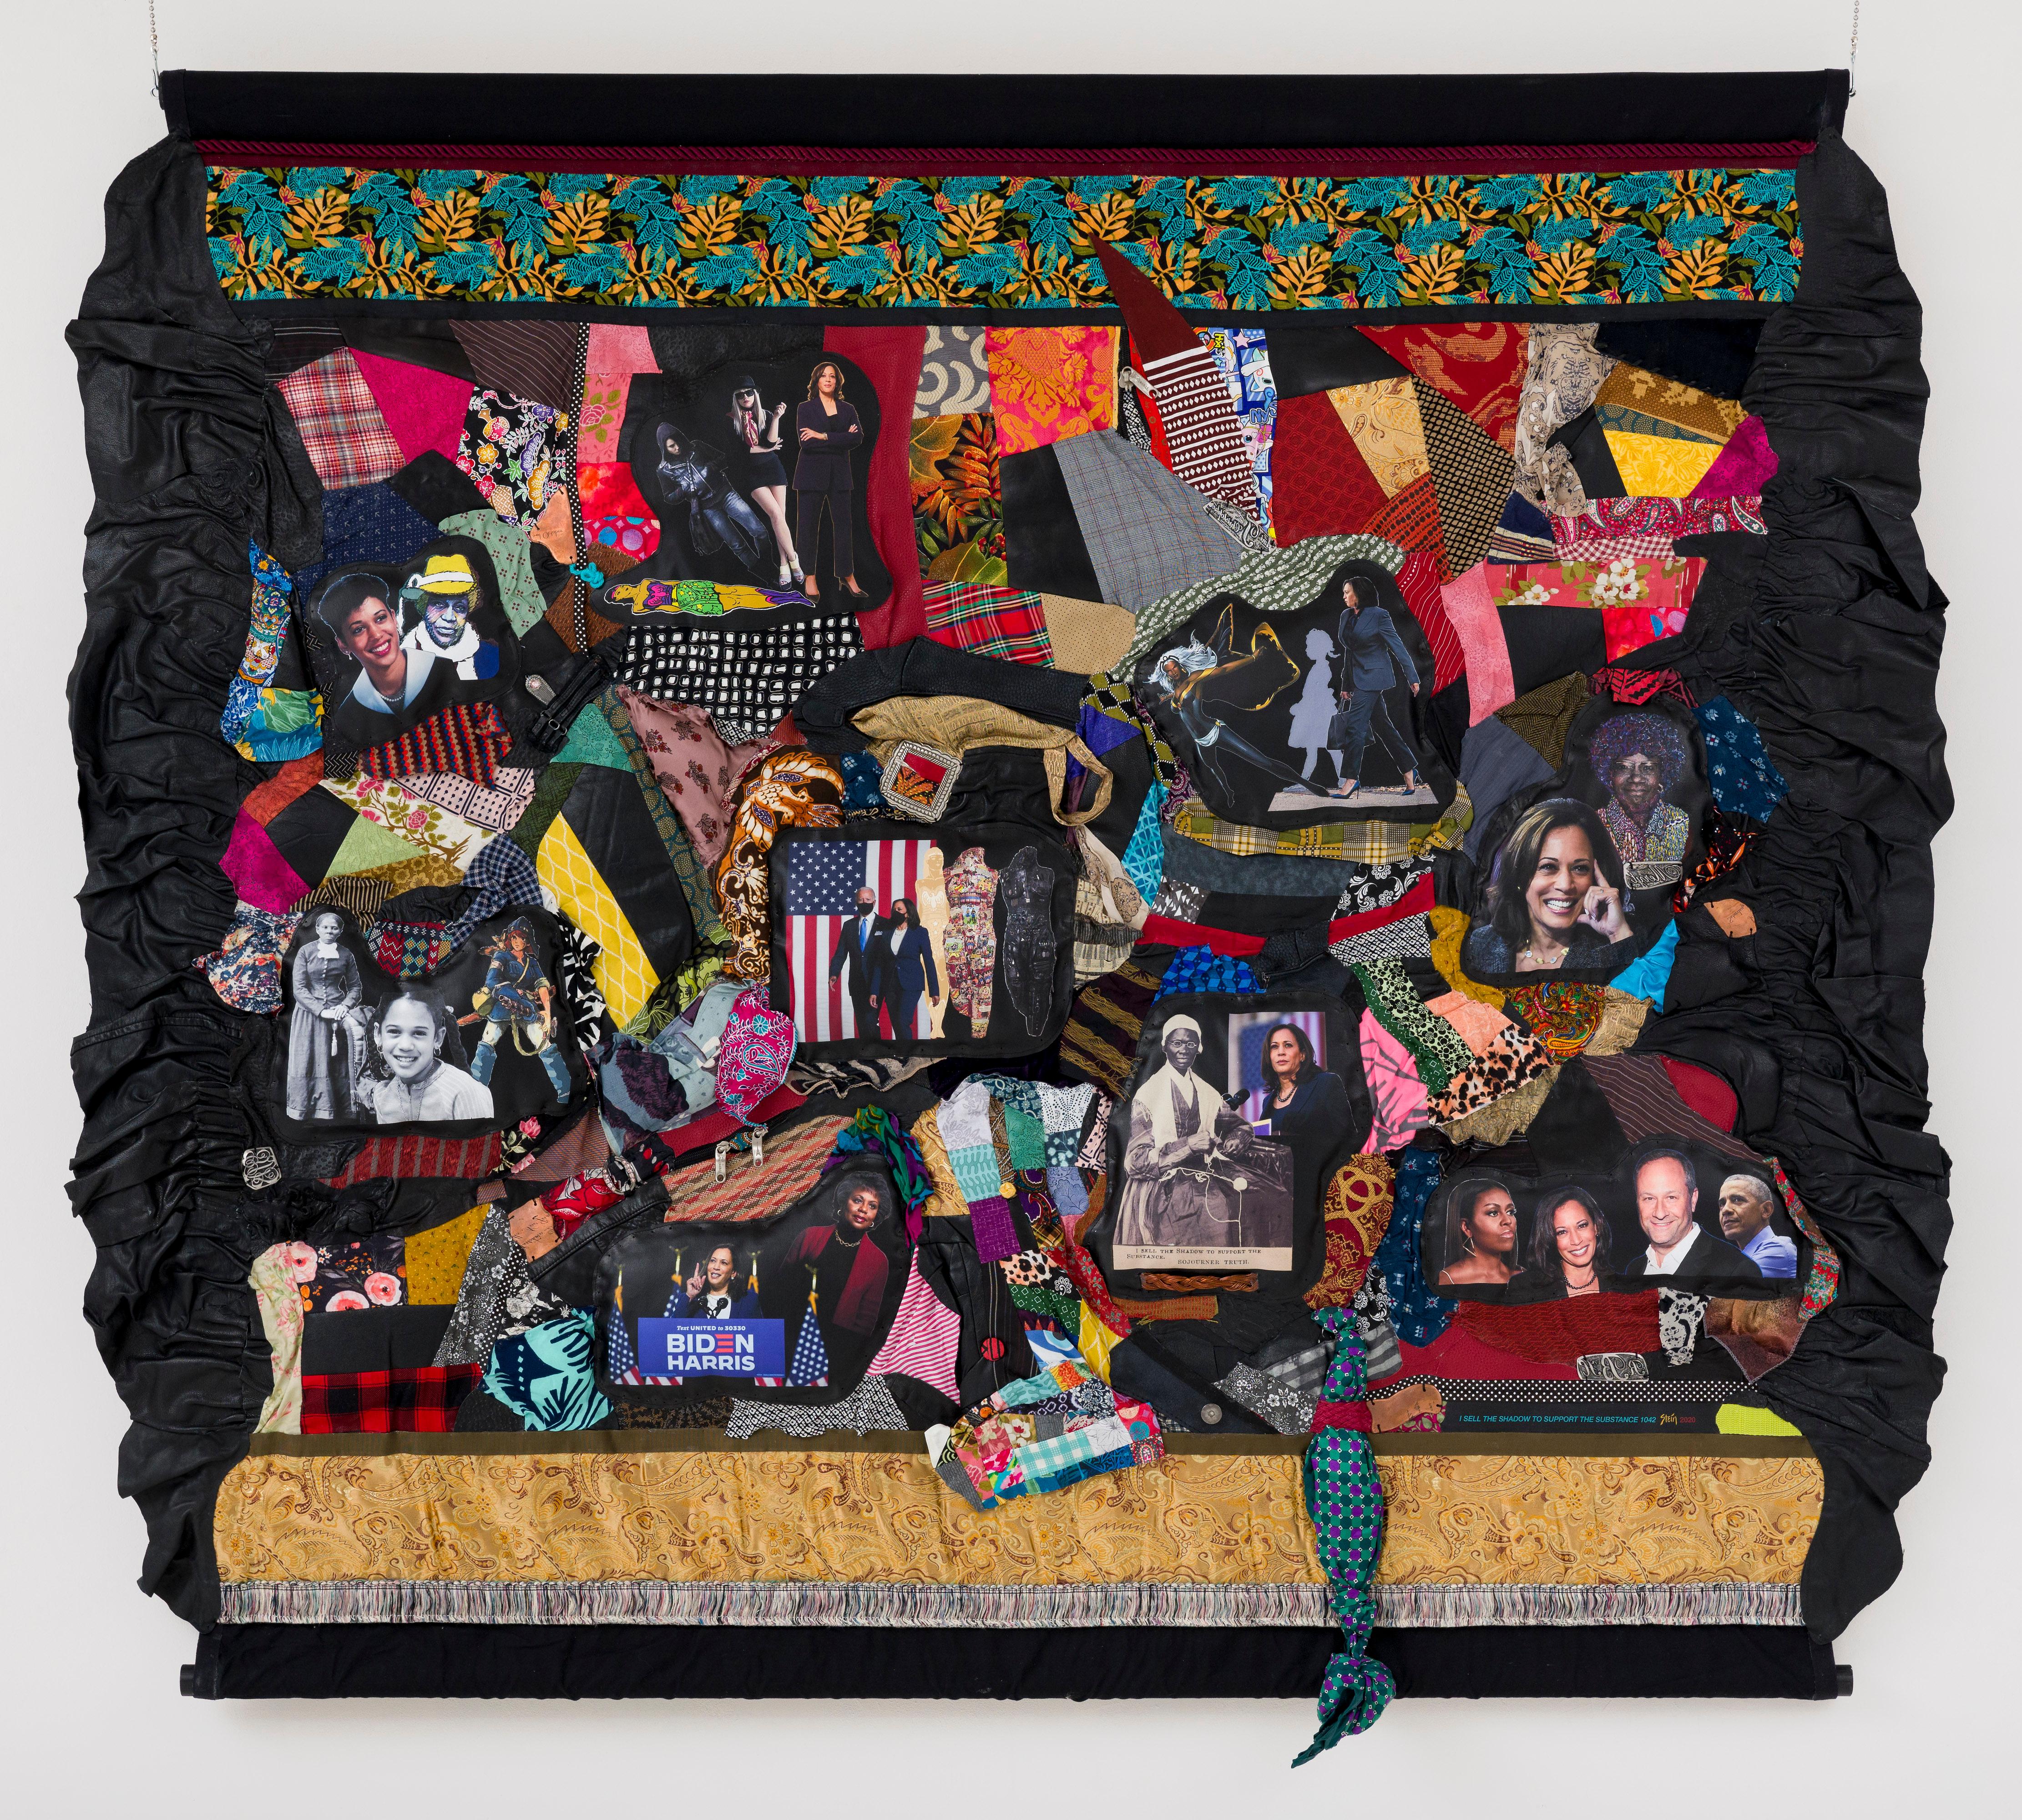 Feminist Contemporary Fabric Leather Sculptural Tapestry - Kamala Harris 1042 - Mixed Media Art by Linda Stein